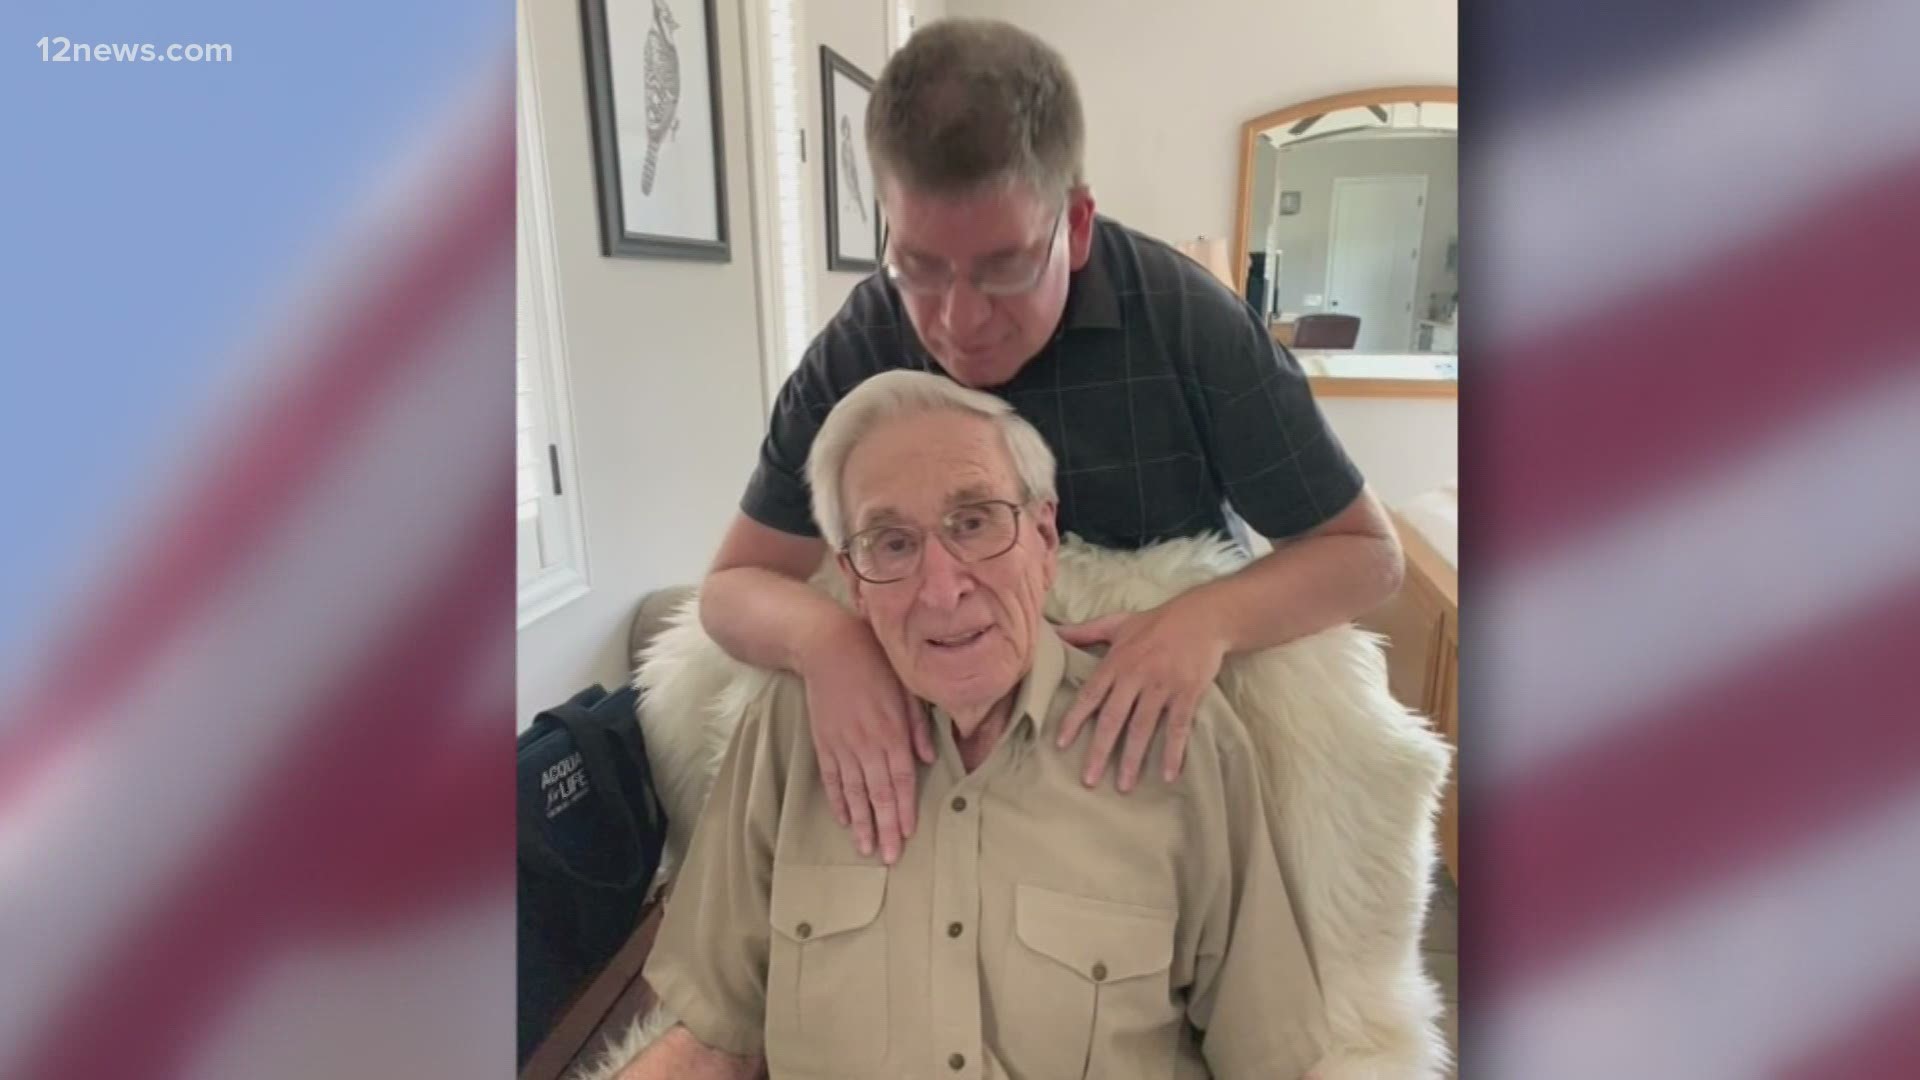 One brave Arizonan risked his life to save the lives of so many others. WWII veteran Fred Engstrom recalls harrowing missions and working on secret missions.